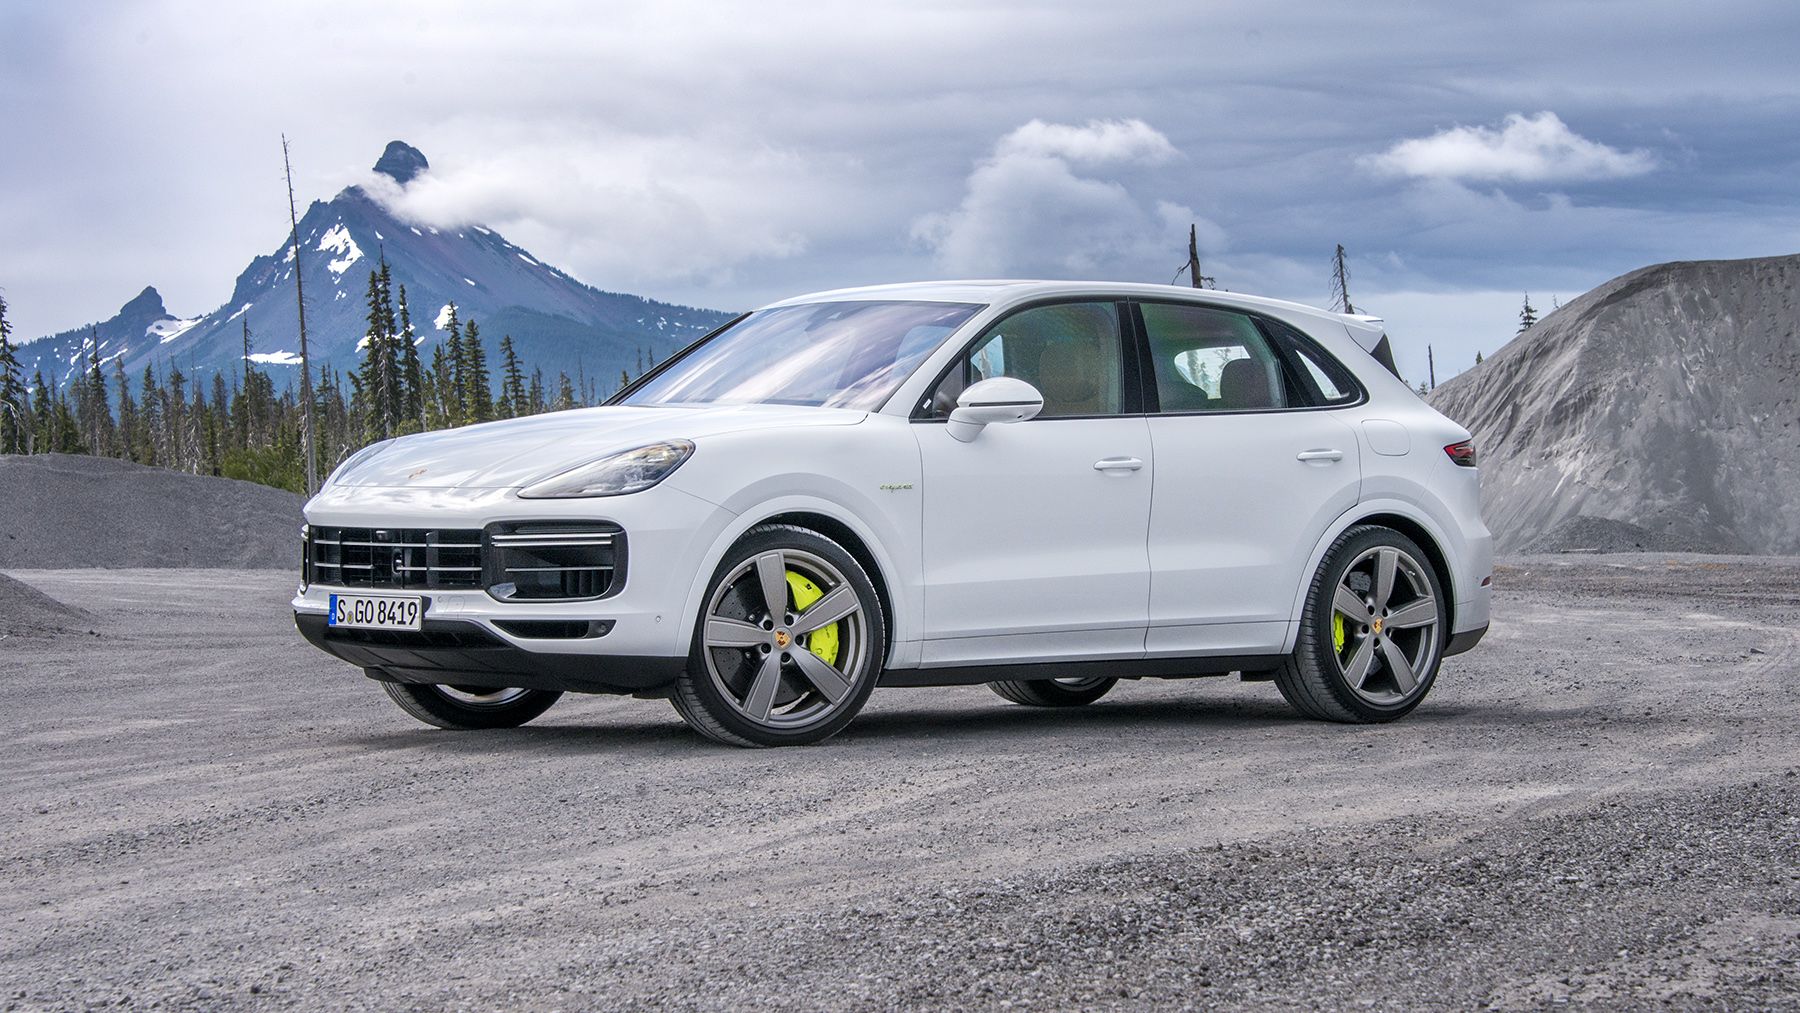 2020 Porsche Cayenne Turbo S E-hybrid drive review, photos, specs,  performance and price